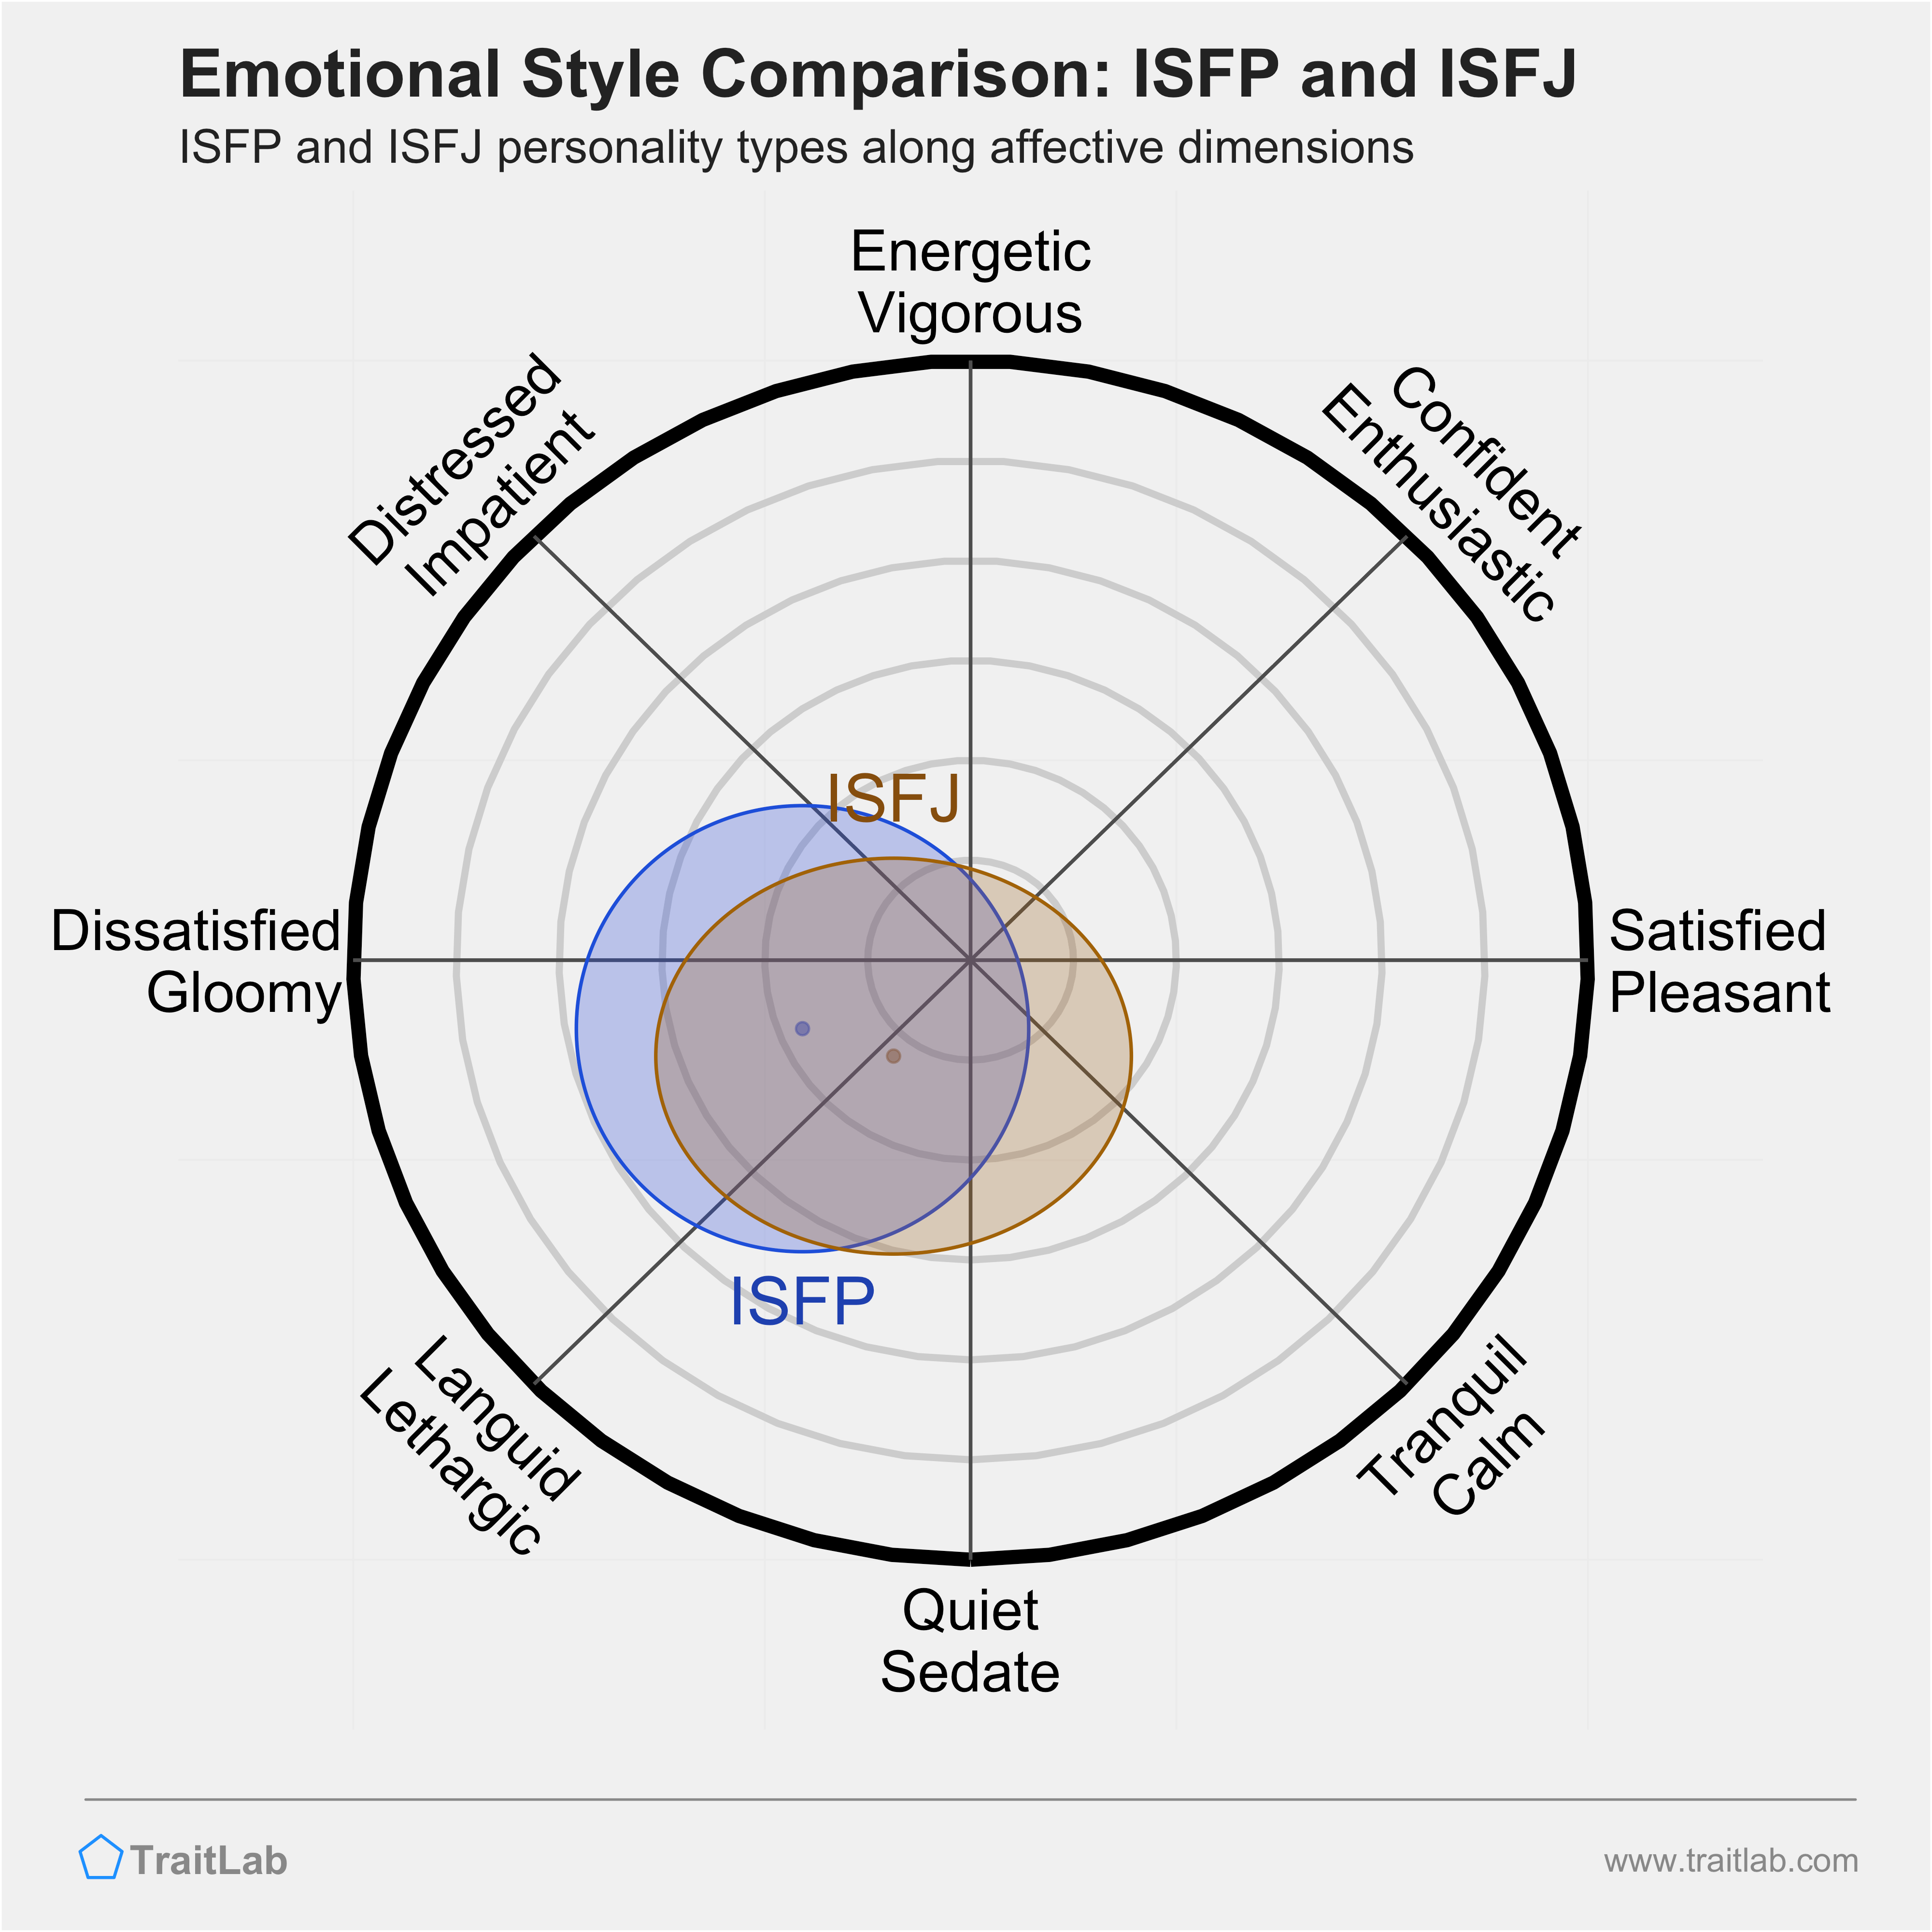 ISFP and ISFJ comparison across emotional (affective) dimensions